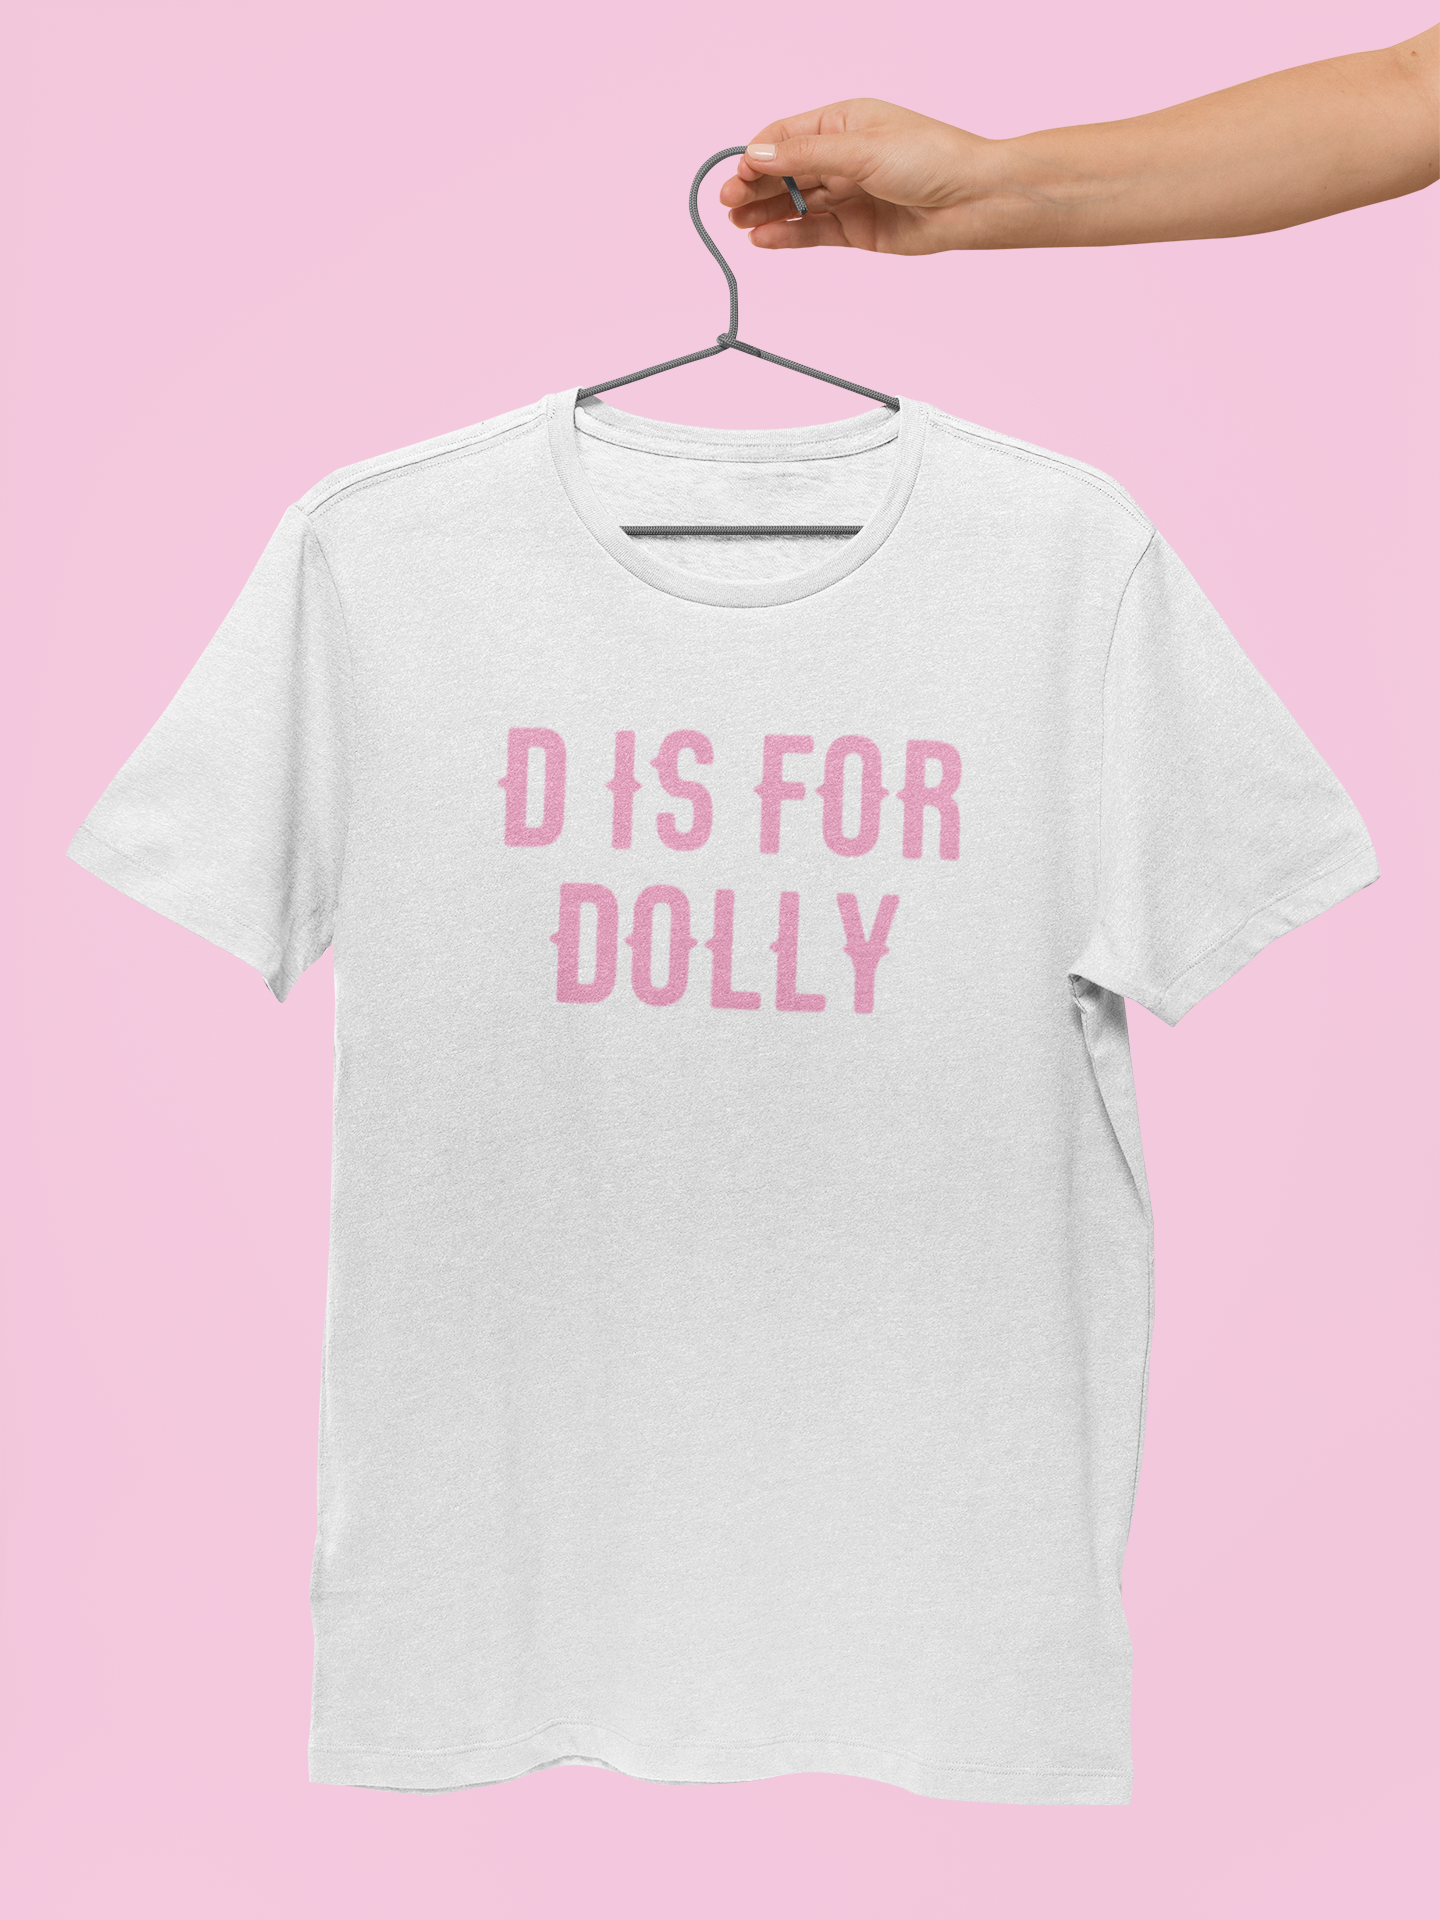 D is for Dolly Shirt